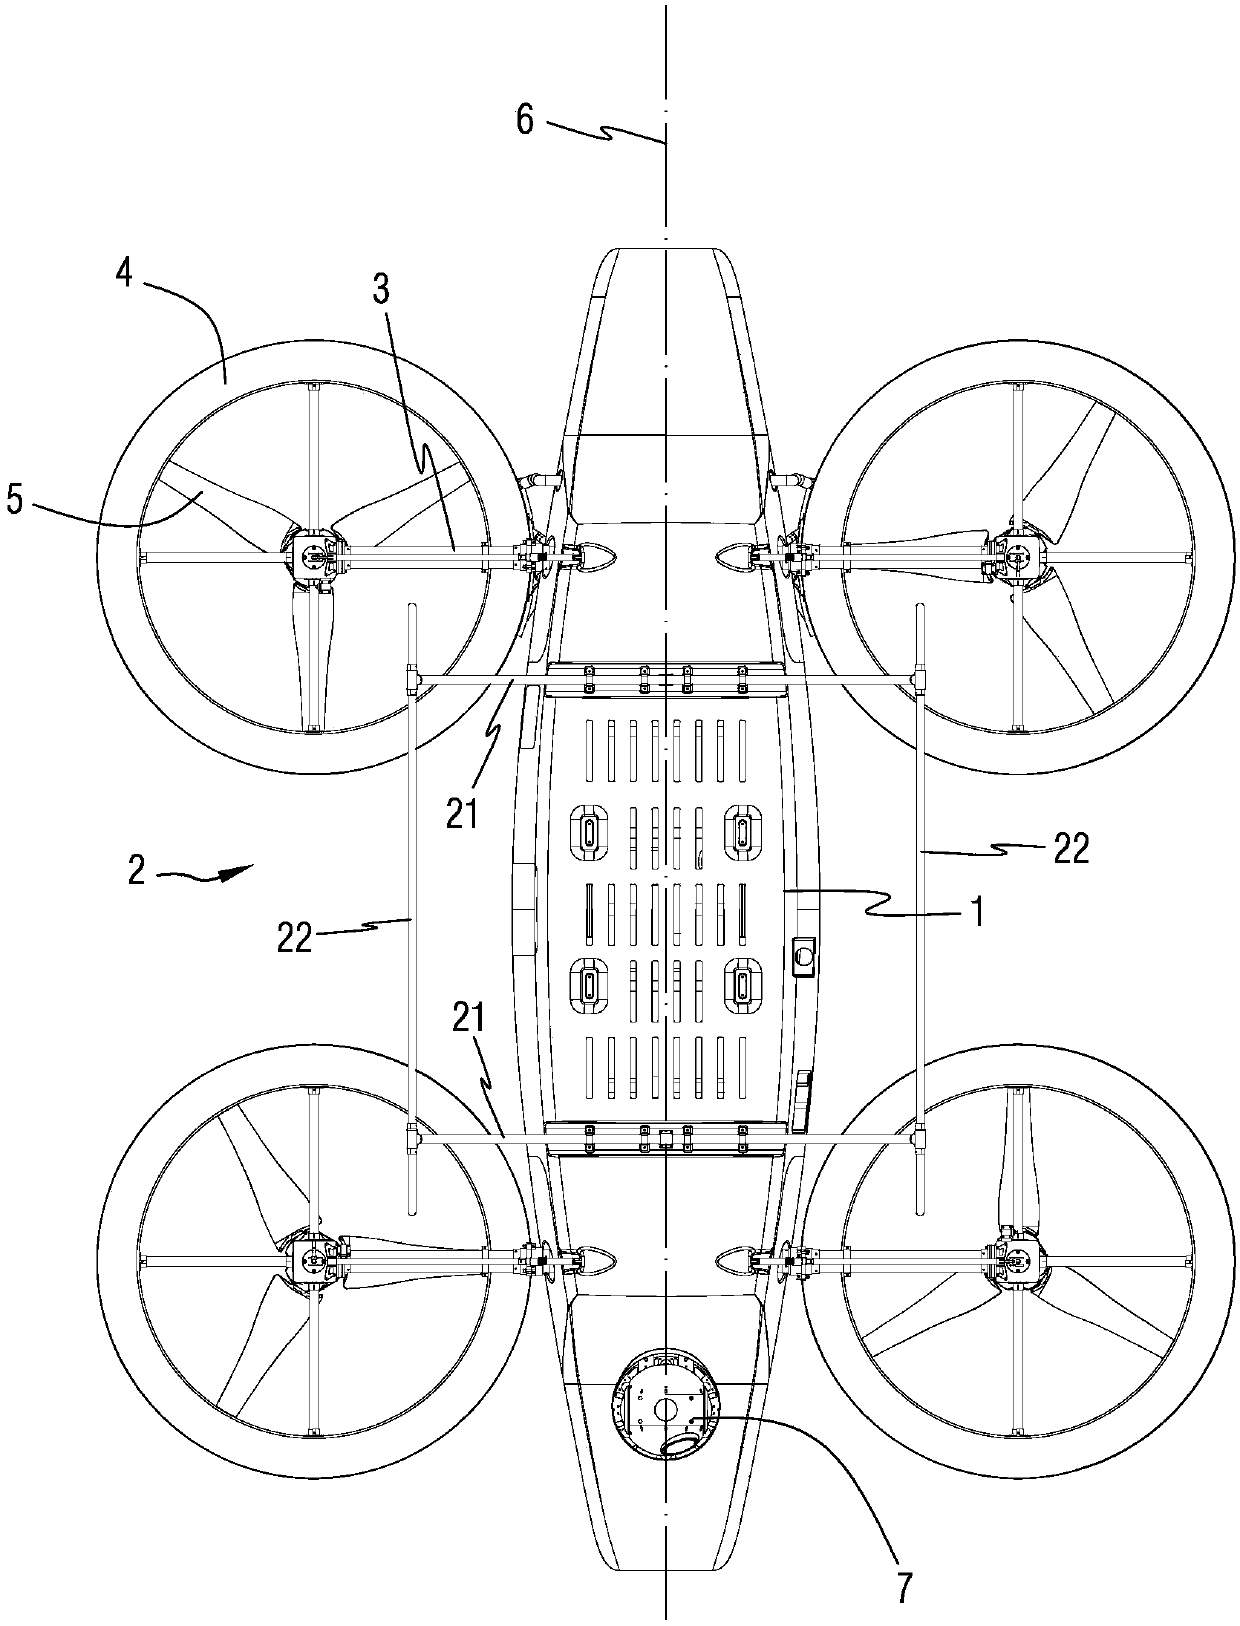 Oil-driven unmanned aerial vehicle landing gear